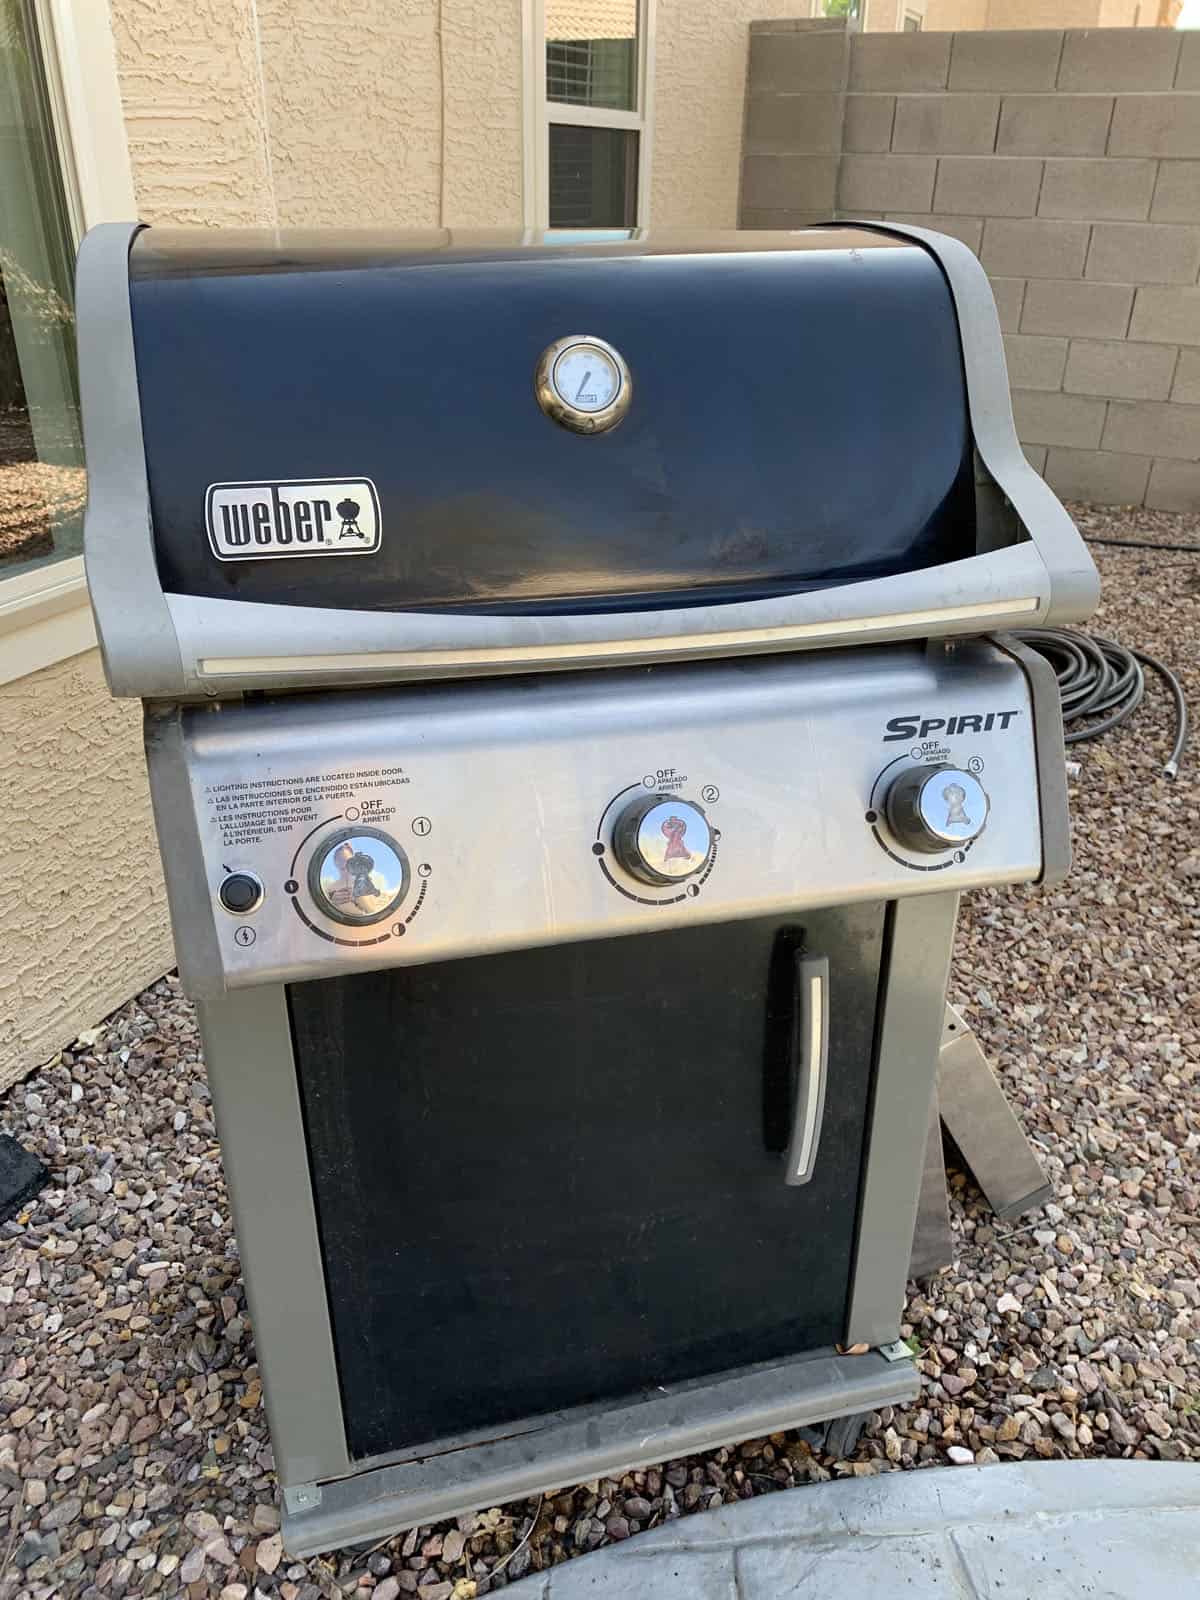 Cleaned gas grill